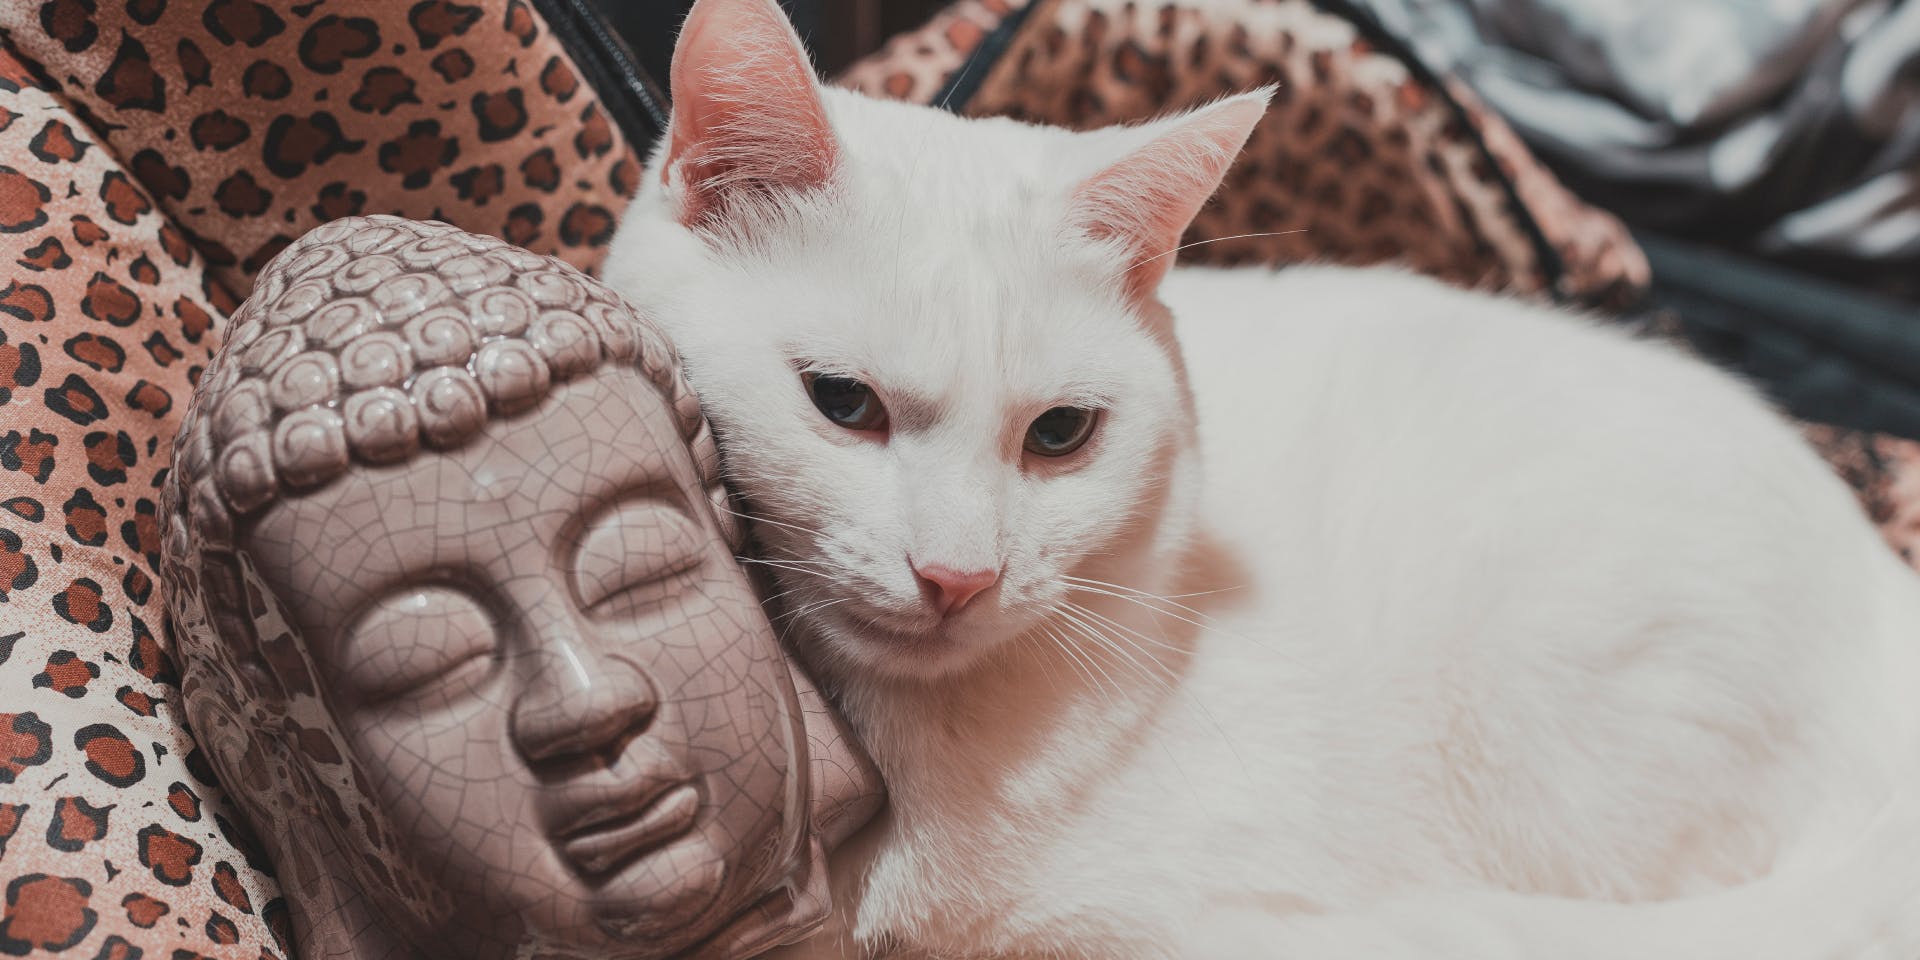 A white cat sitting with a statue of Buddah